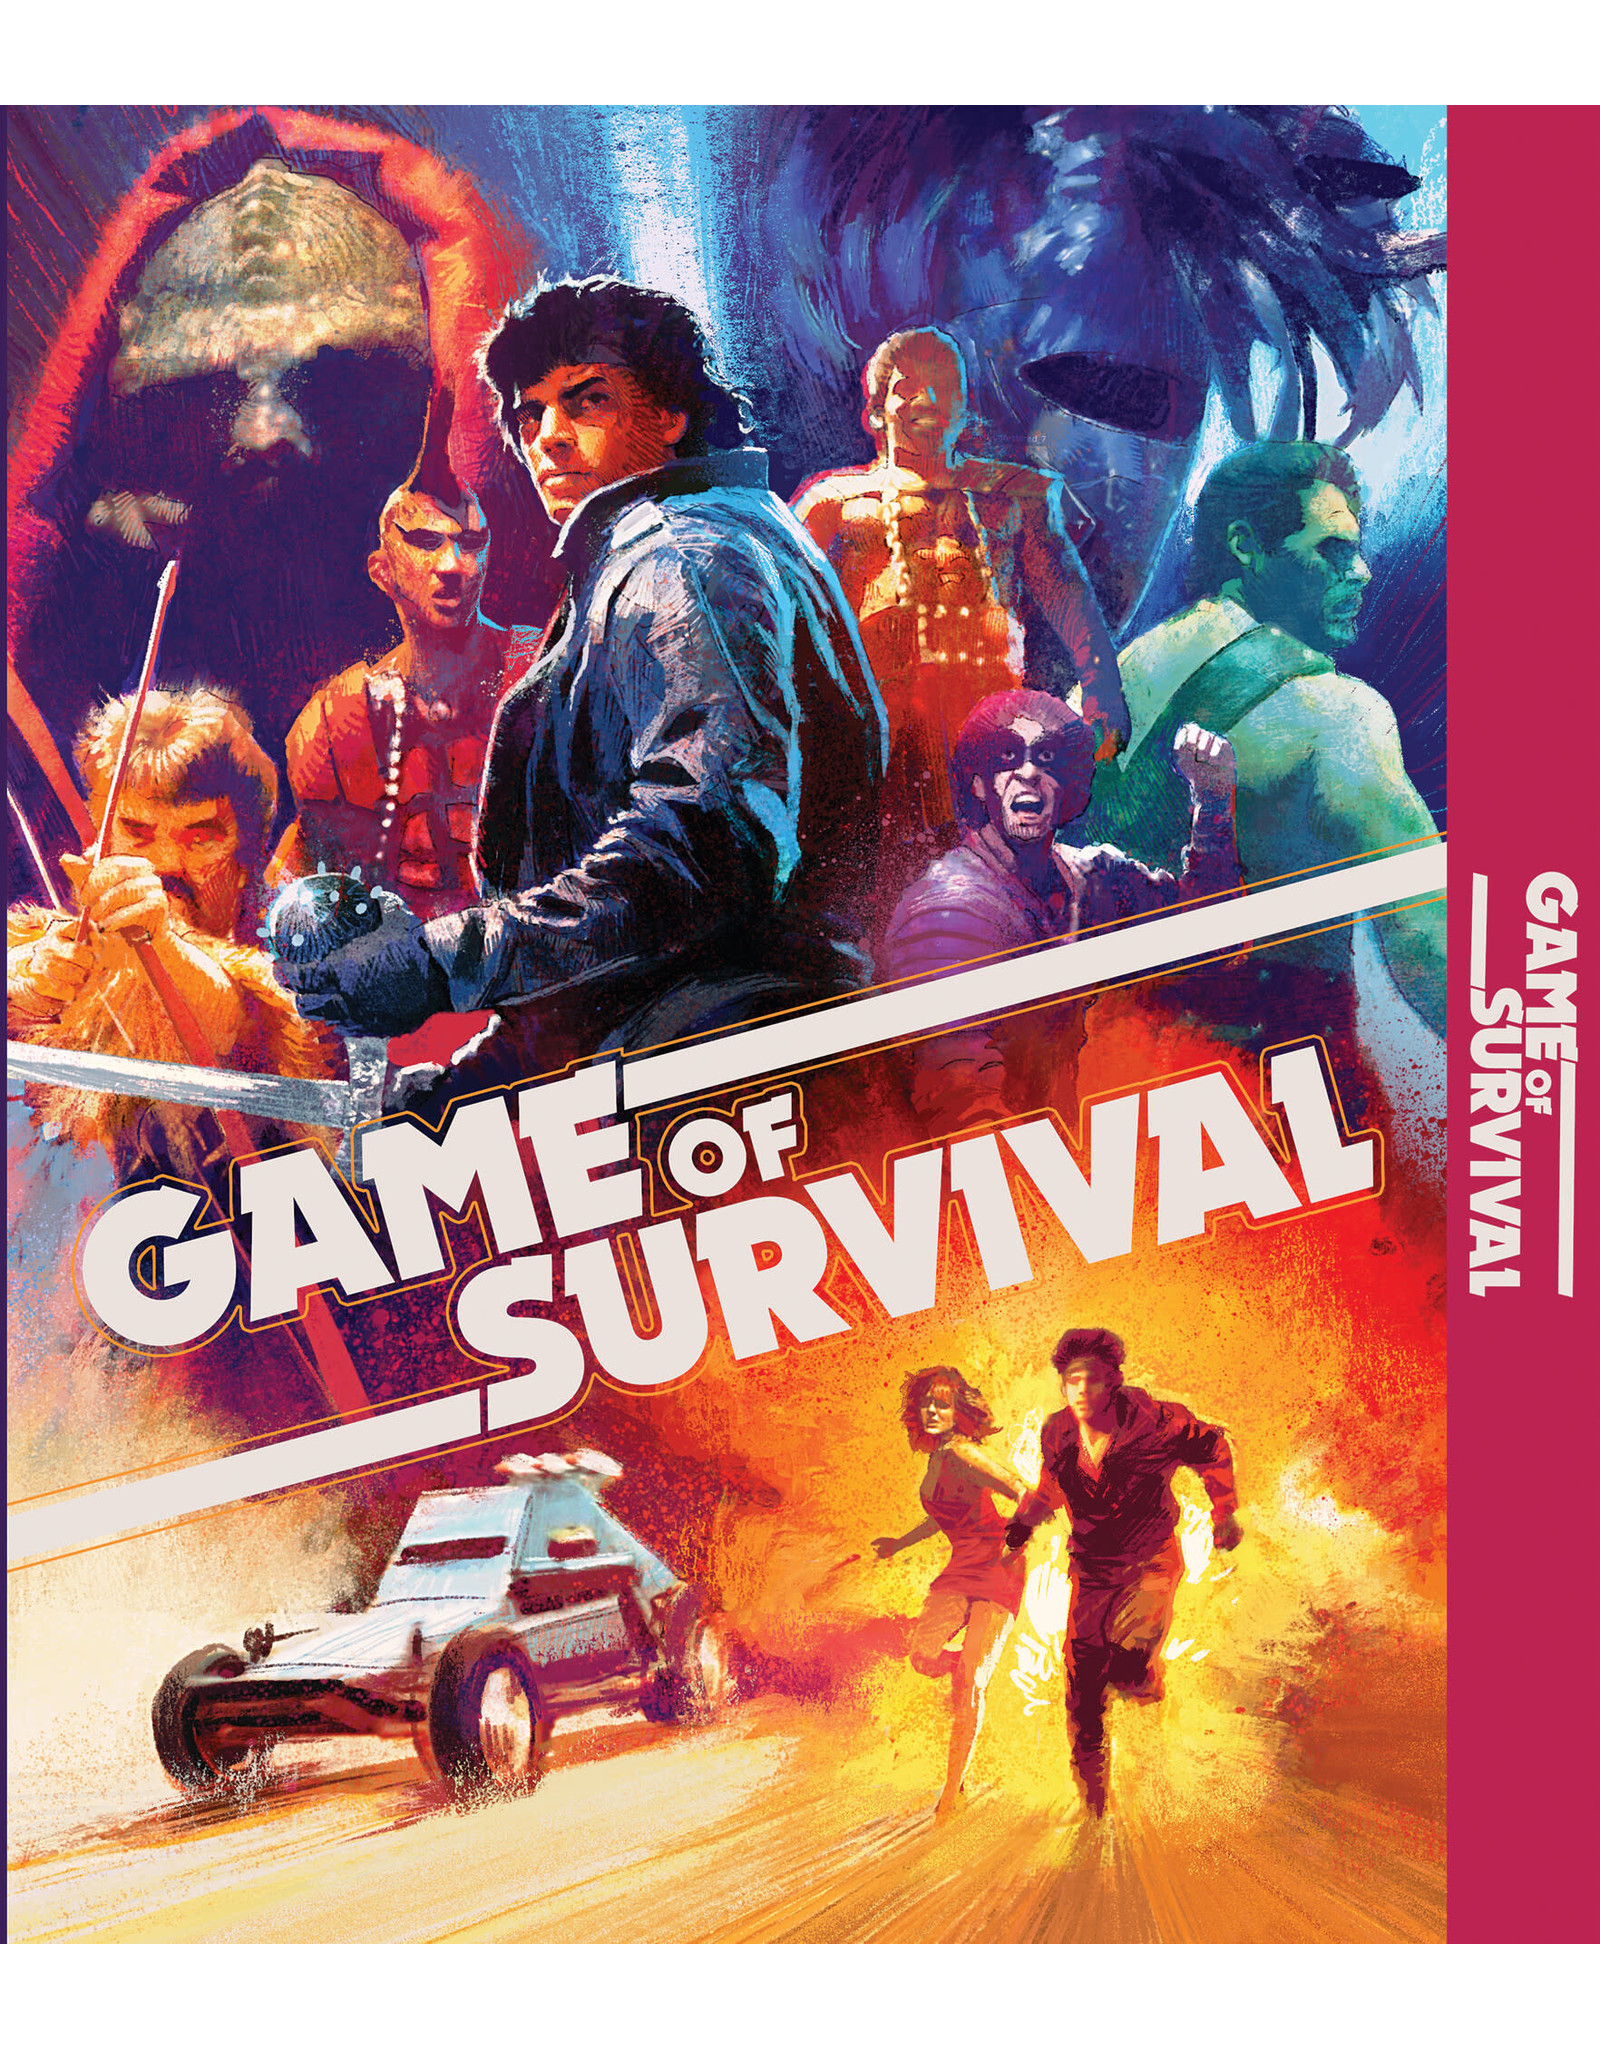 Cult & Cool Game of Survival - Culture Shock Releasing (Brand New w/ Slipcover)